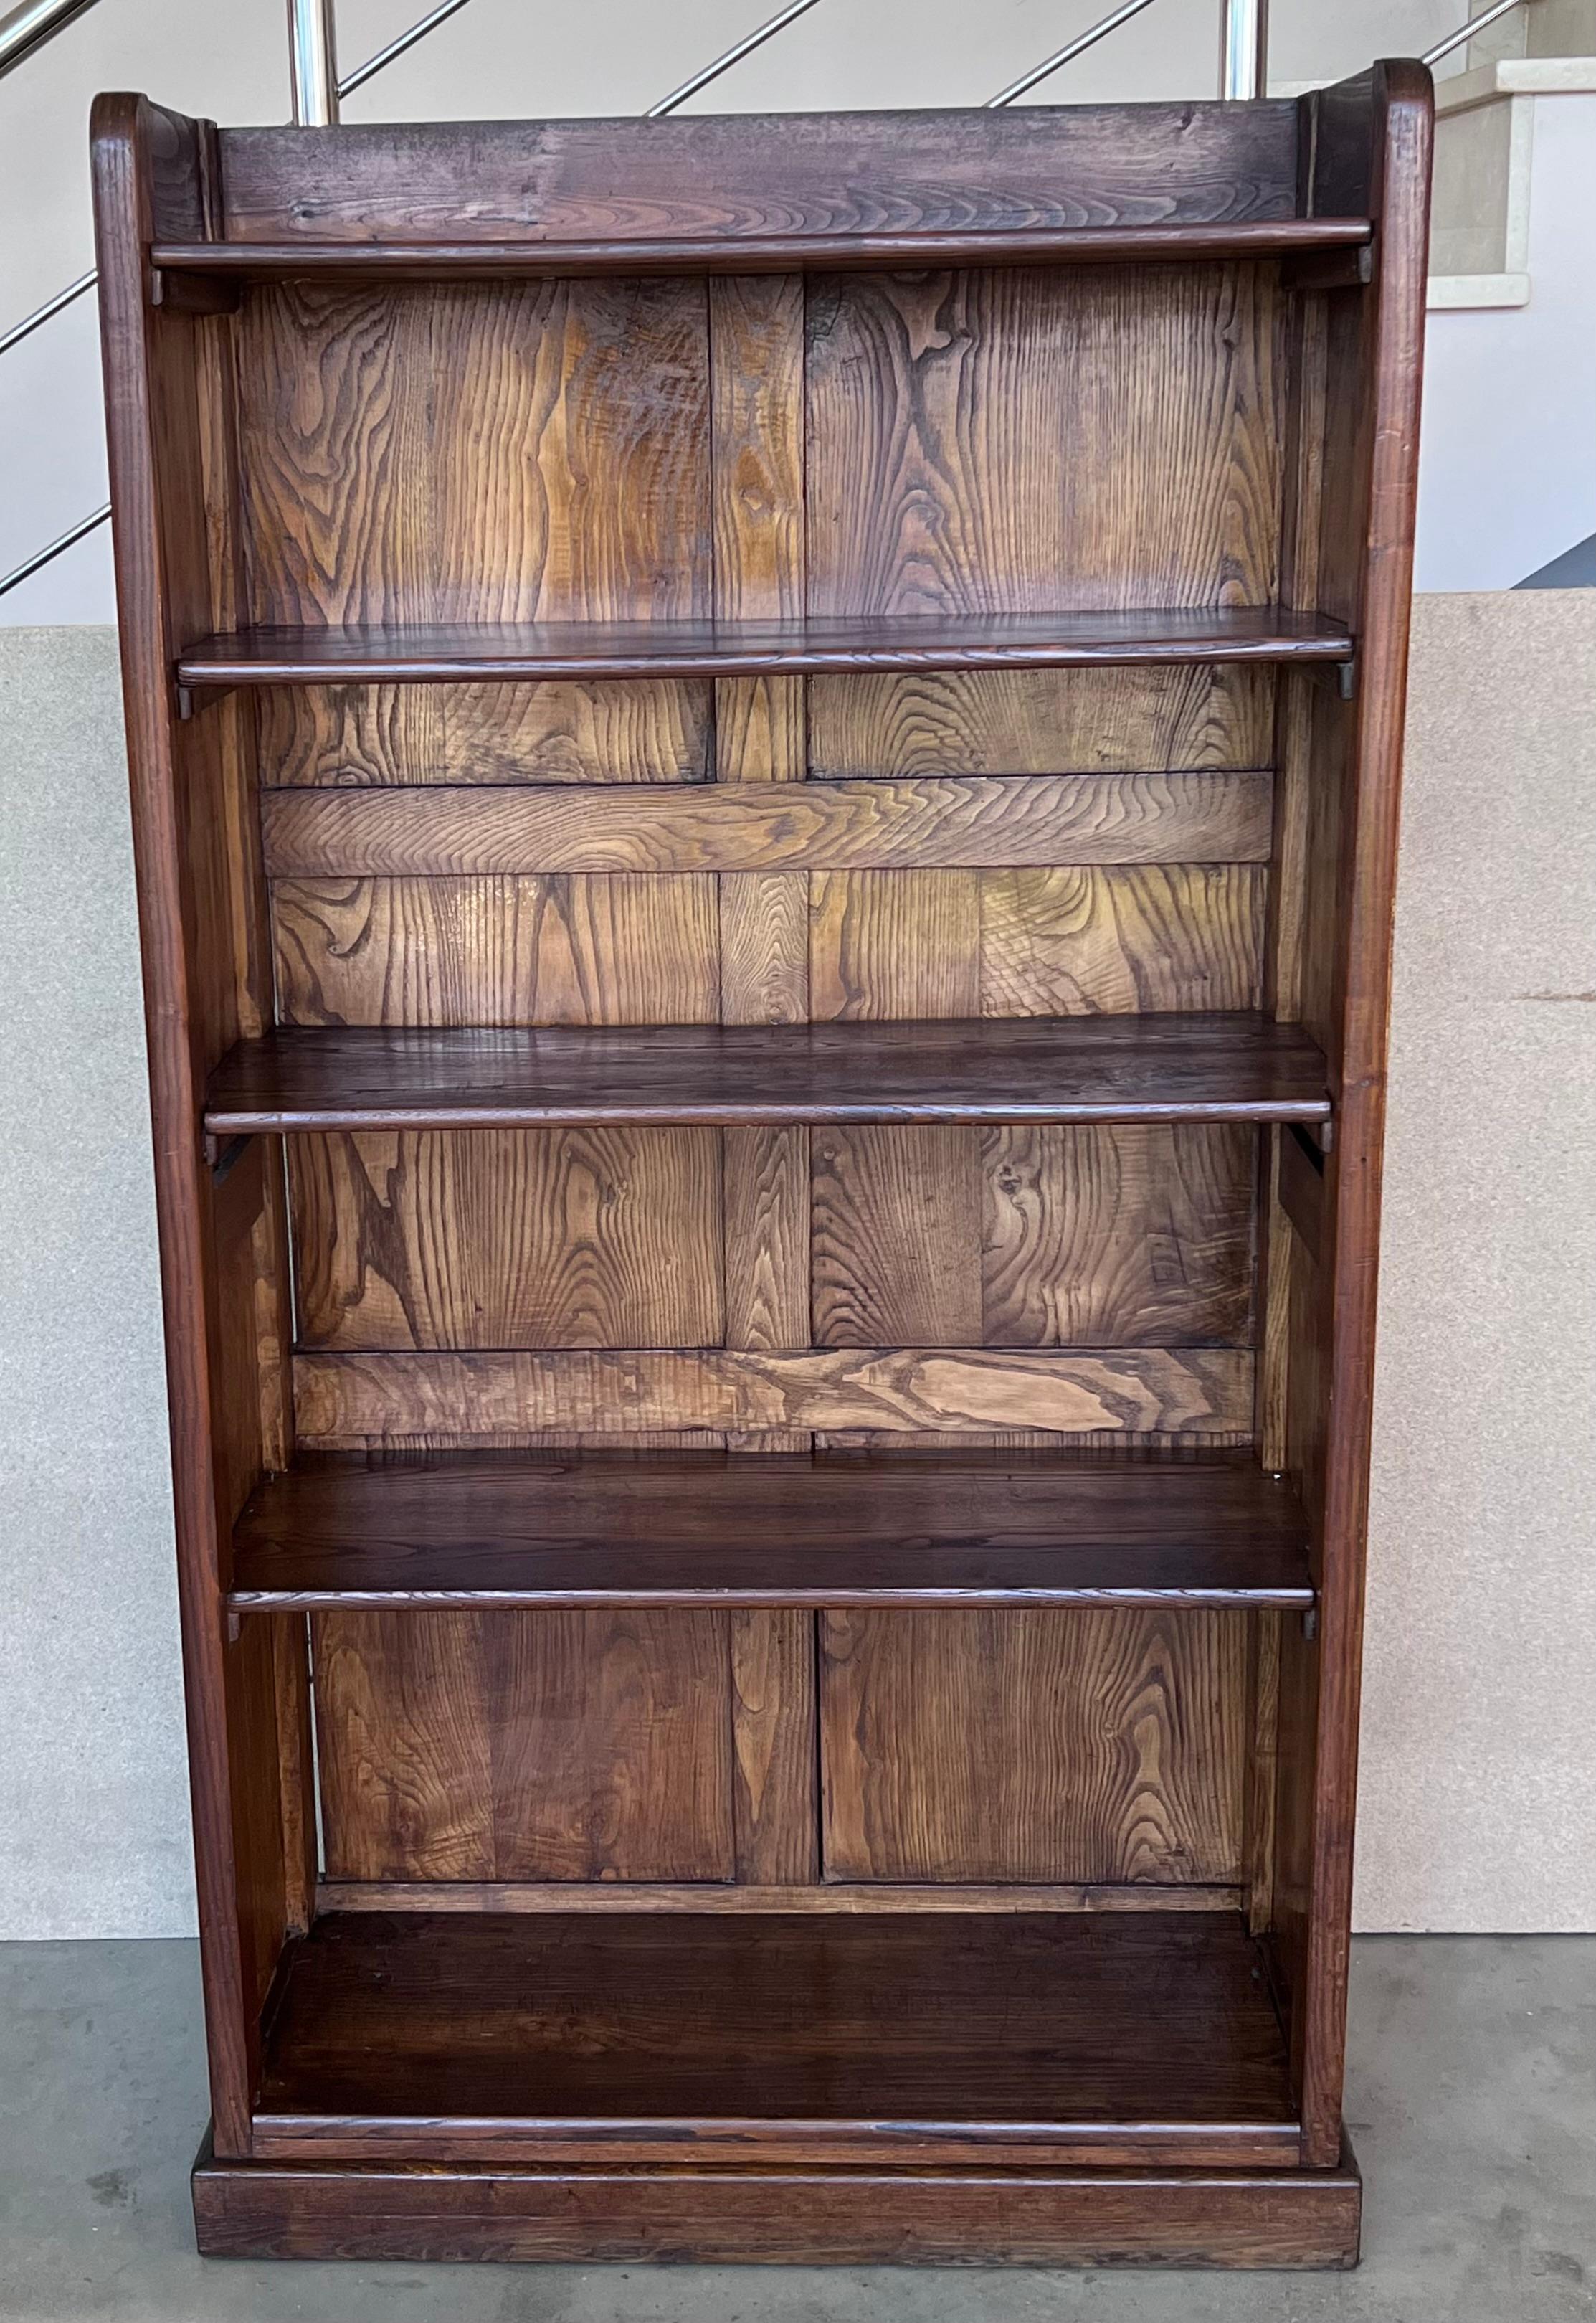 Spanish Colonial 19th Solid Oak Bookcase or Etagere with Five Shelves